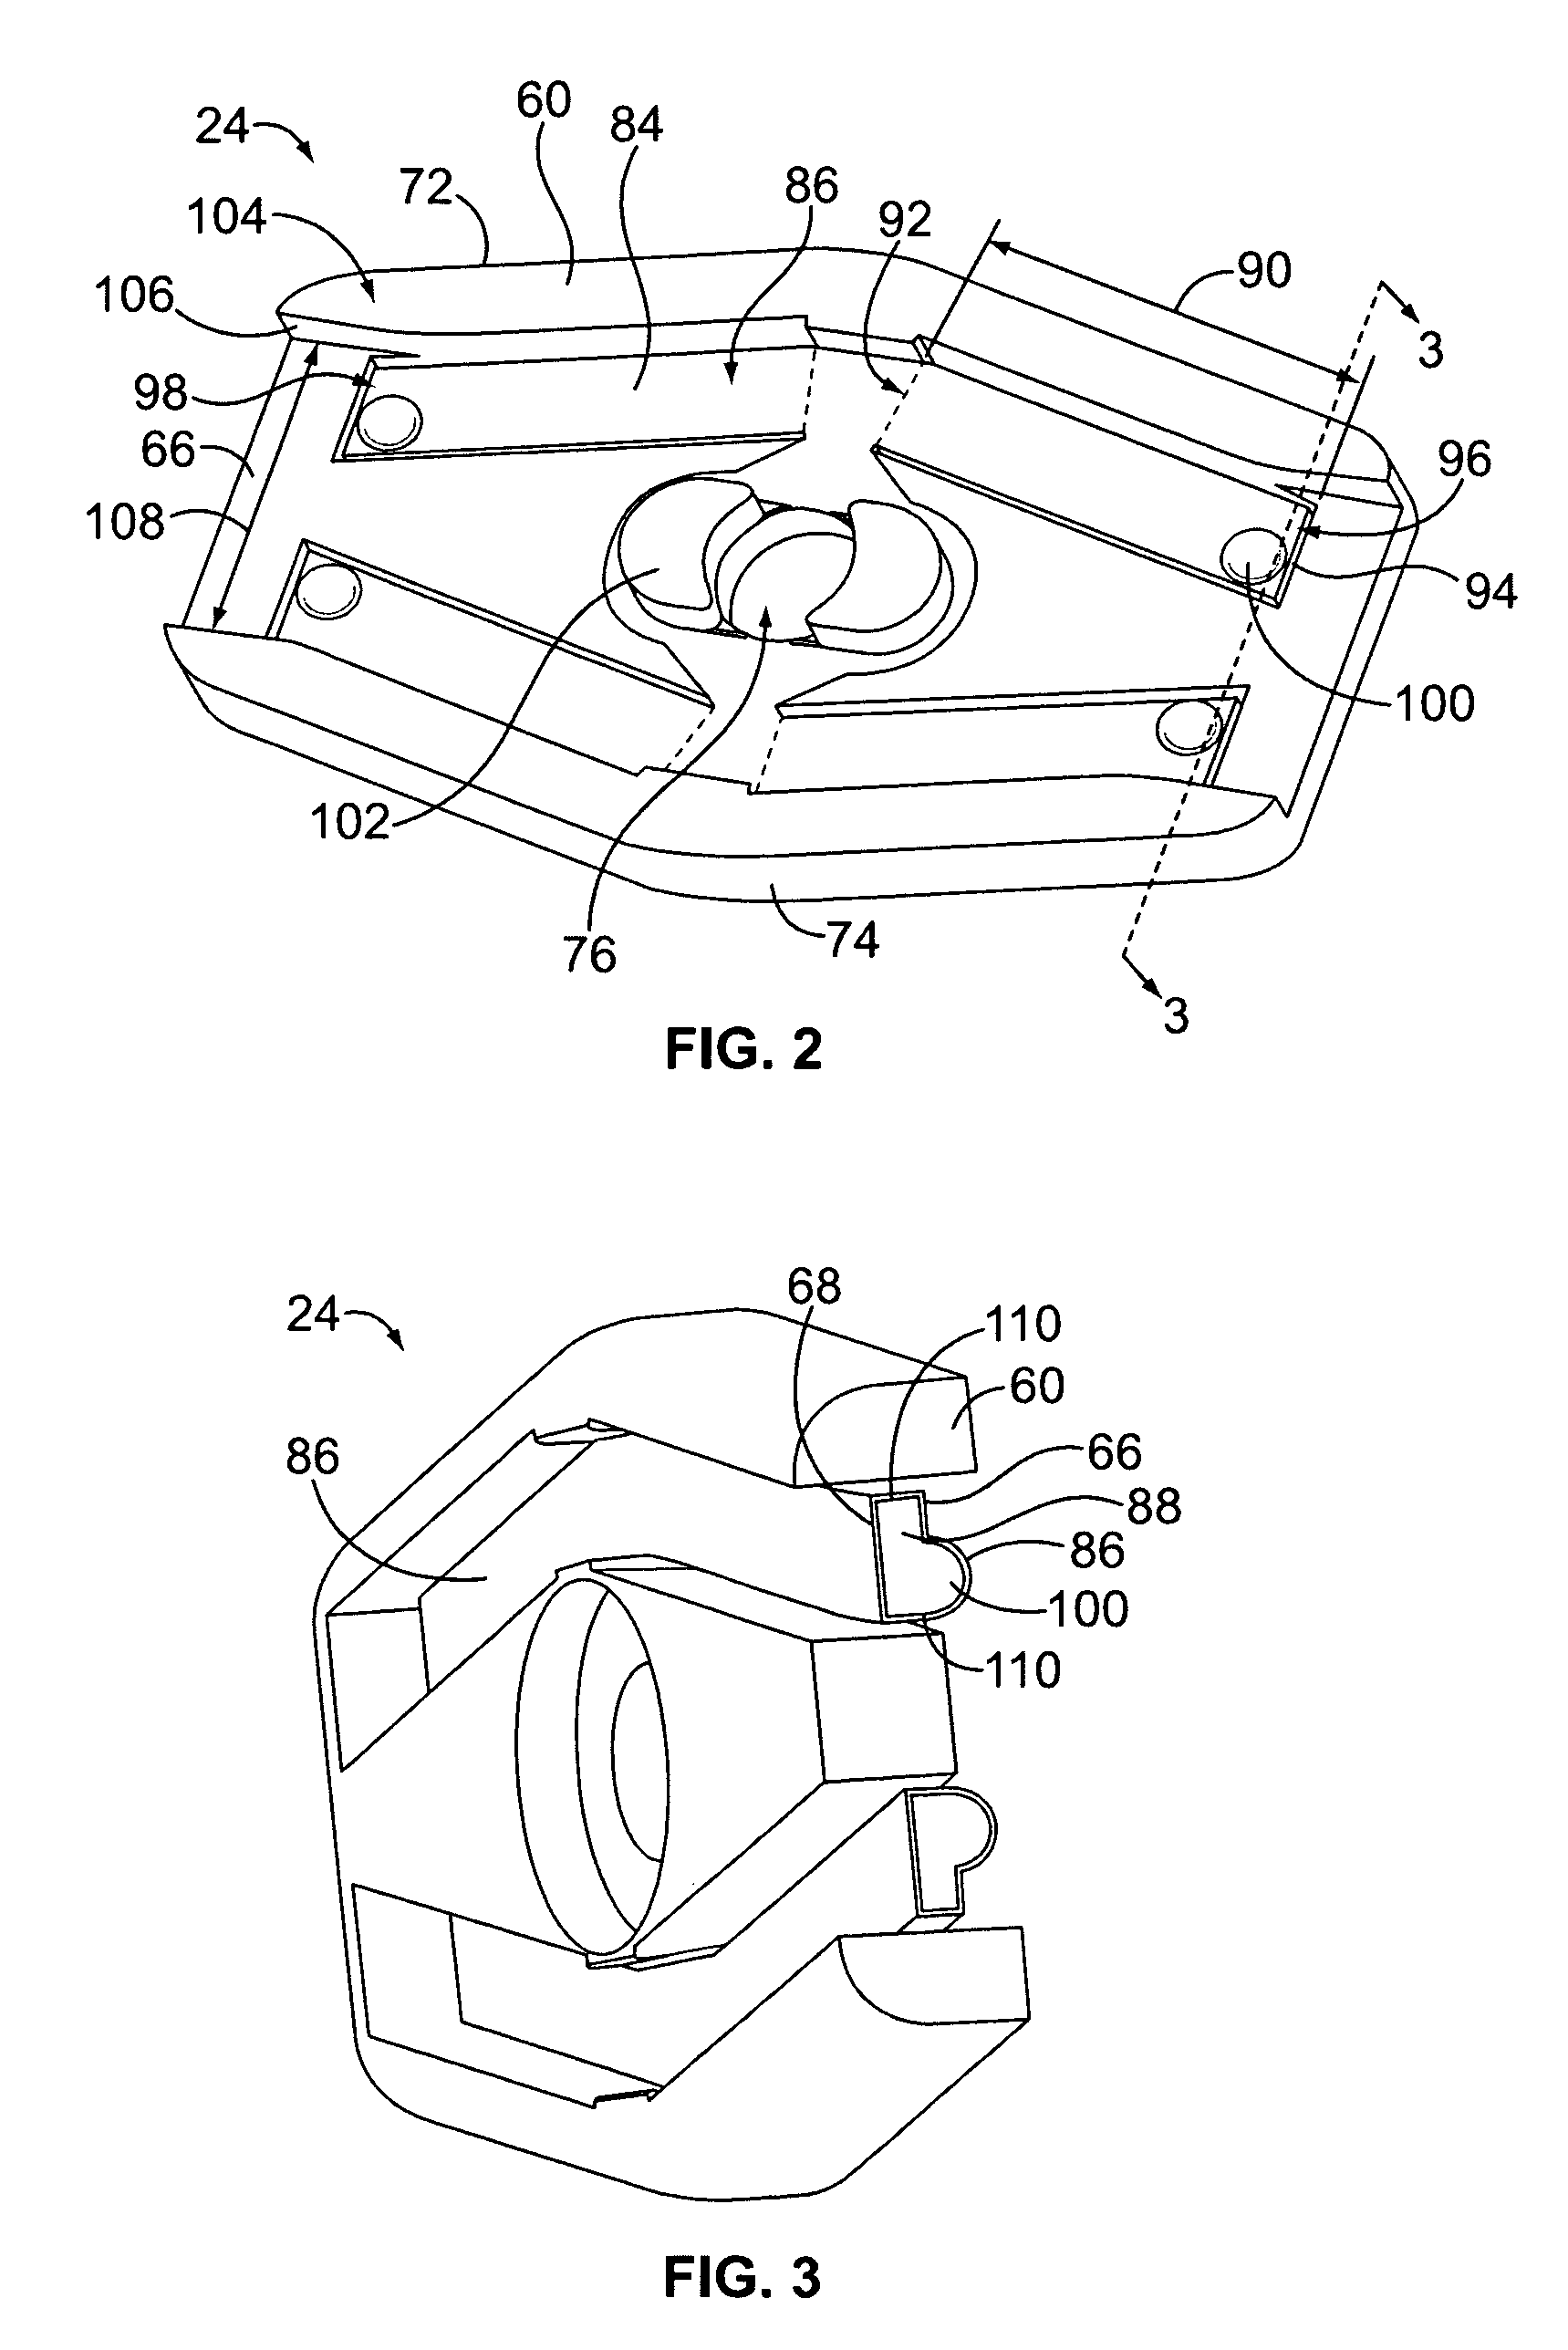 Jumper connector for a lighting assembly